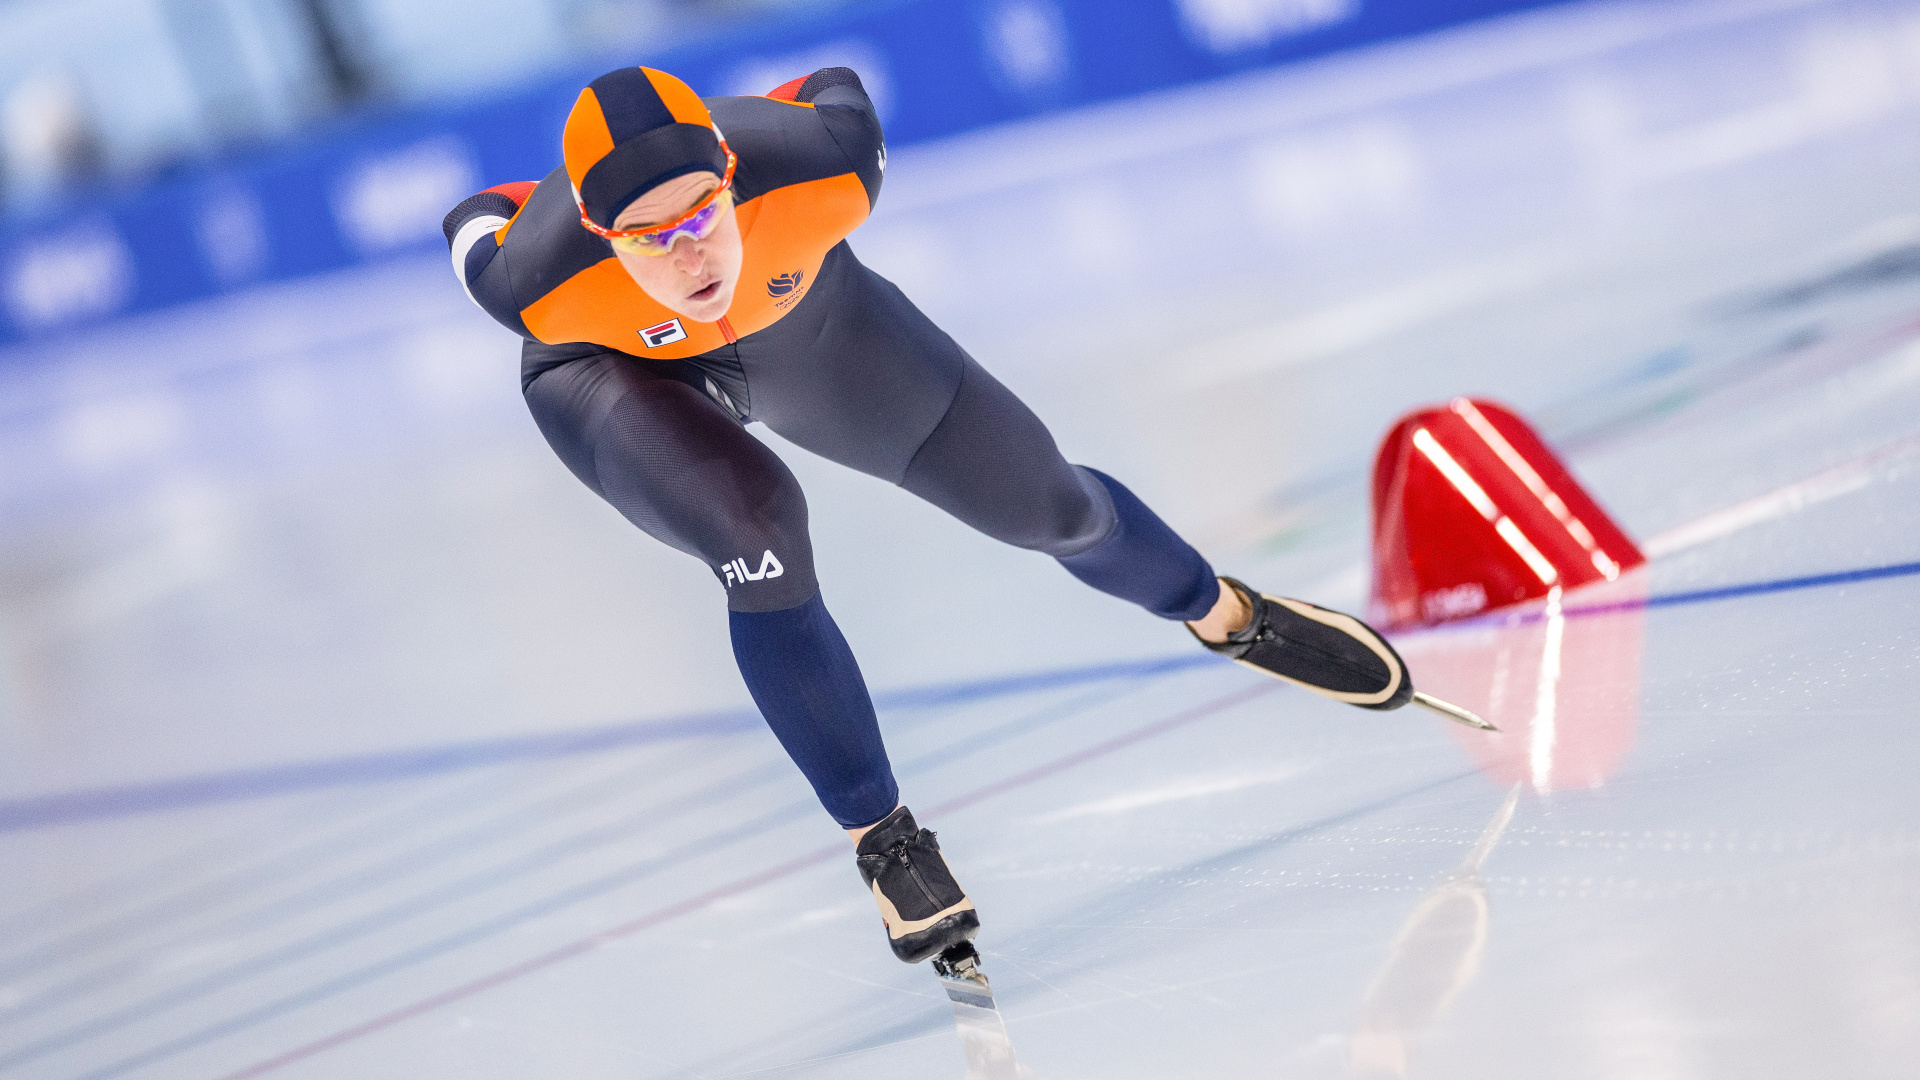 Speed Skating: Ireen Wust, The youngest Dutch Olympic gold medalist, The most successful speed skating Olympian. 1920x1080 Full HD Background.